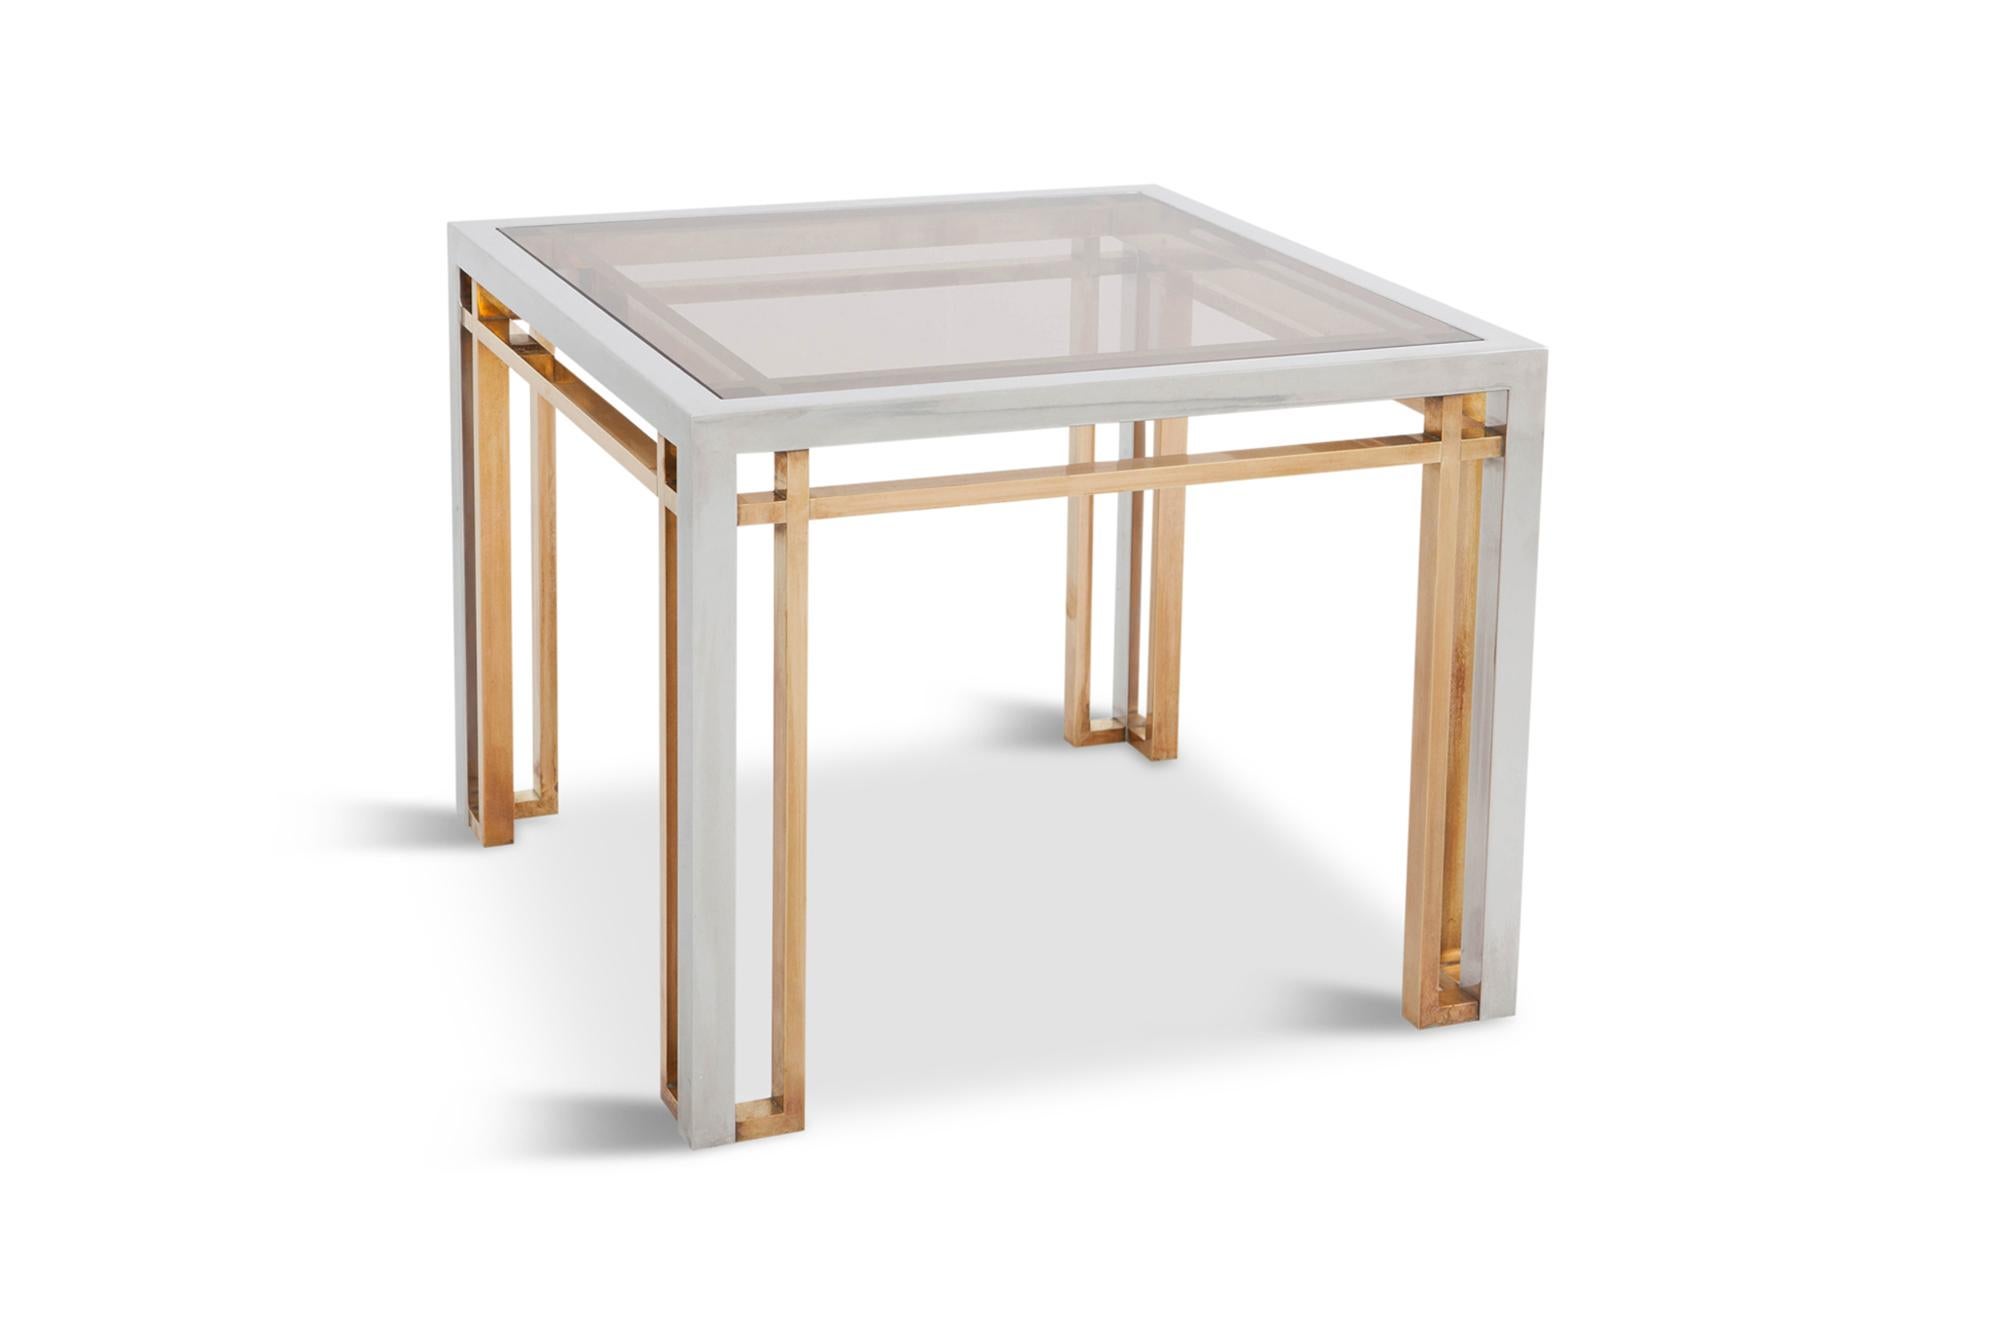 Hollywood Regency Romeo Rega Side Tables in Chrome, Brass and Glass